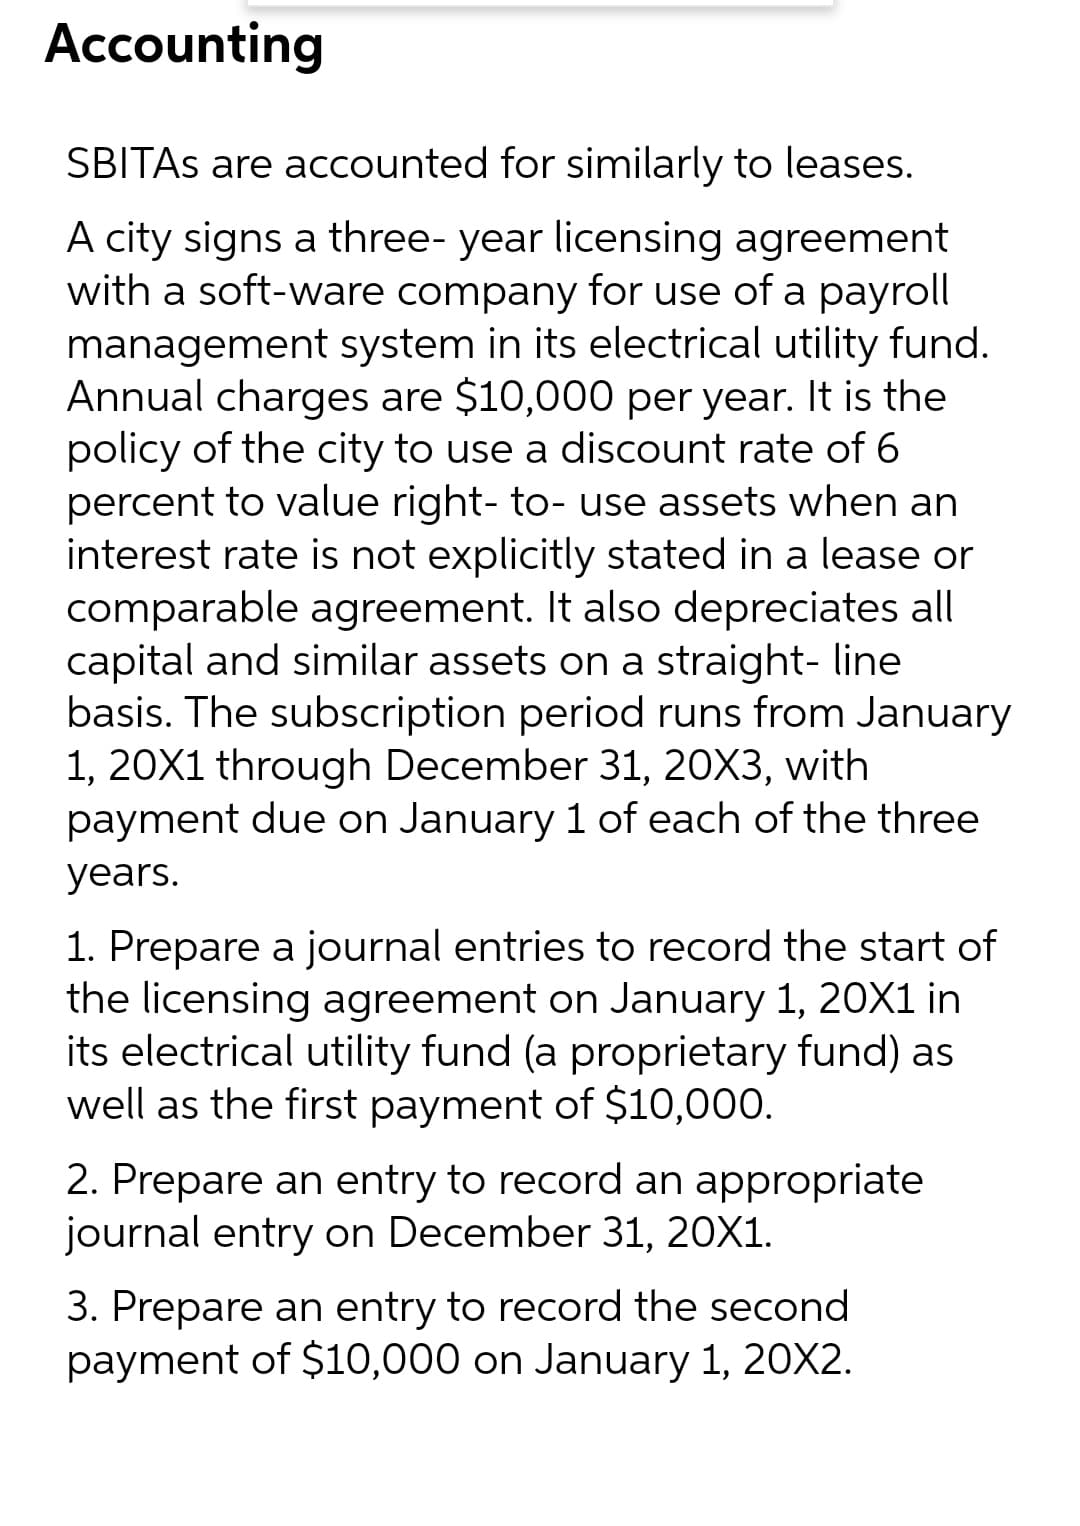 Accounting
SBITAS are accounted for similarly to leases.
A city signs a three- year licensing agreement
with a soft-ware company for use of a payroll
management system in its electrical utility fund.
Annual charges are $10,000 per year. It is the
policy of the city to use a discount rate of 6
percent to value right- to- use assets when an
interest rate is not explicitly stated in a lease or
comparable agreement. It also depreciates all
capital and similar assets on a straight- line
basis. The subscription period runs from January
1, 20X1 through December 31, 20X3, with
payment due on January 1 of each of the three
years.
1. Prepare a journal entries to record the start of
the licensing agreement on January 1, 20X1 in
its electrical utility fund (a proprietary fund) as
well as the first payment of $10,000.
2. Prepare an entry to record an appropriate
journal entry on December 31, 20X1.
3. Prepare an entry to record the second
payment of $10,000 on January 1, 20X2.
